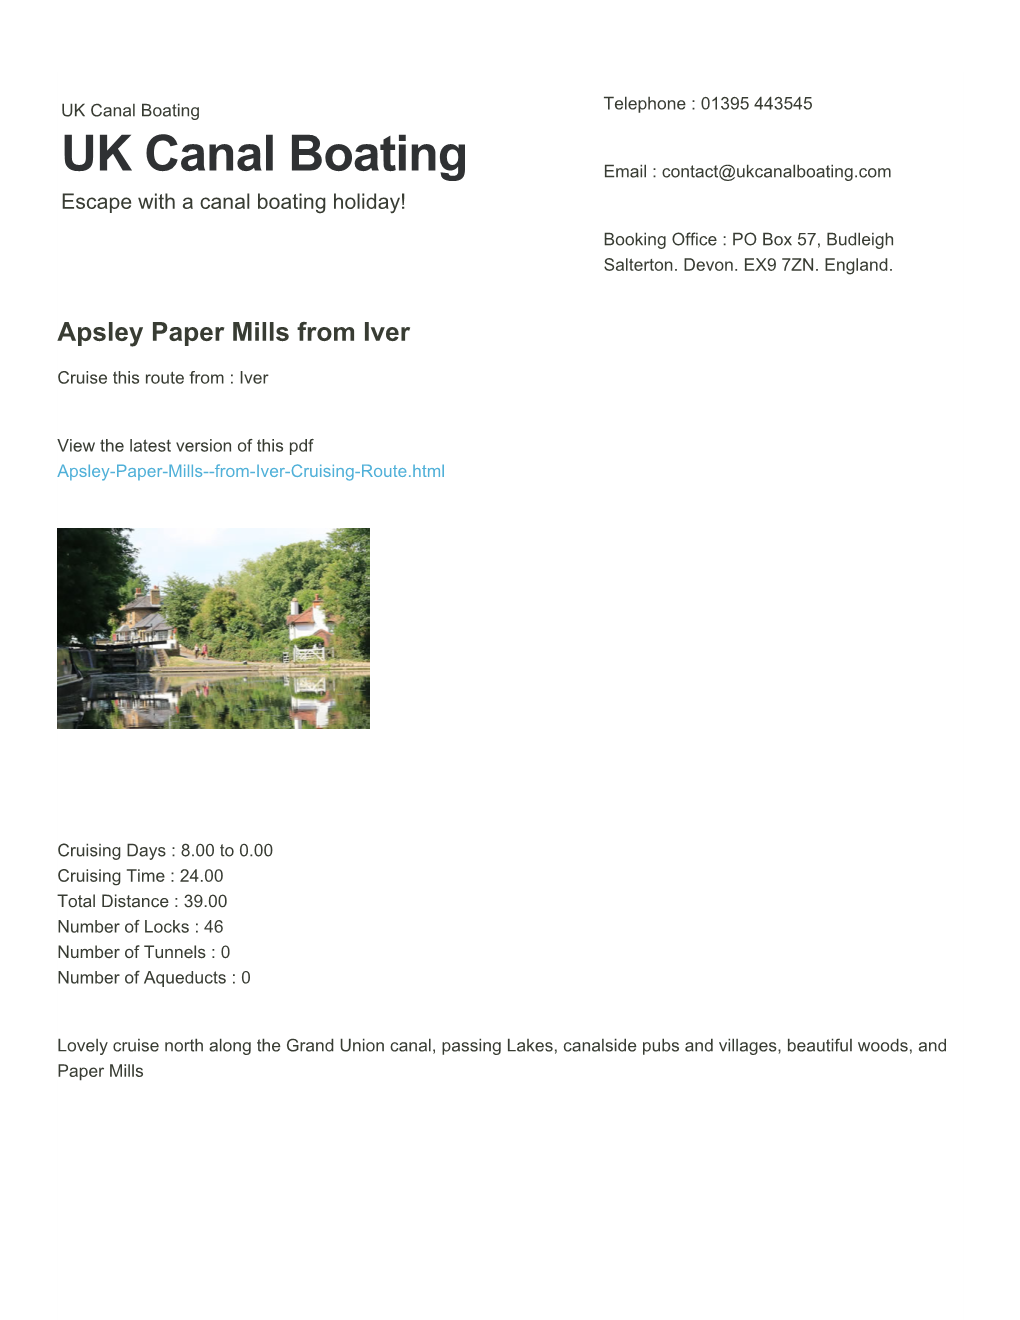 Apsley Paper Mills from Iver | UK Canal Boating